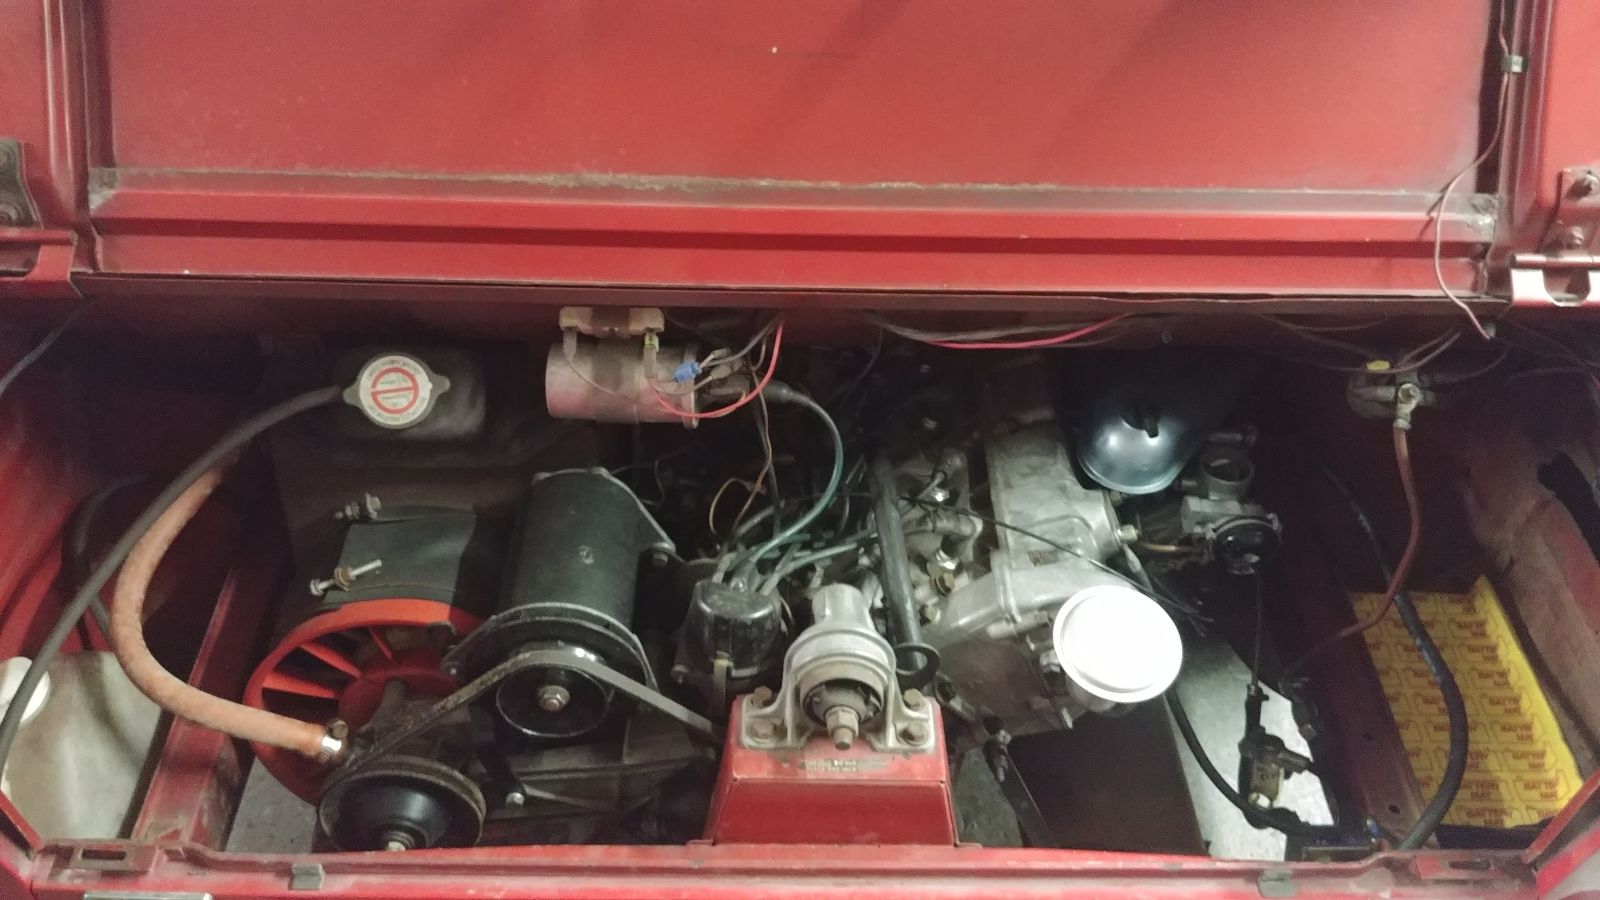 They put the engine in the back. It was designed as a motor for a water pump on a fire truck I believe. 